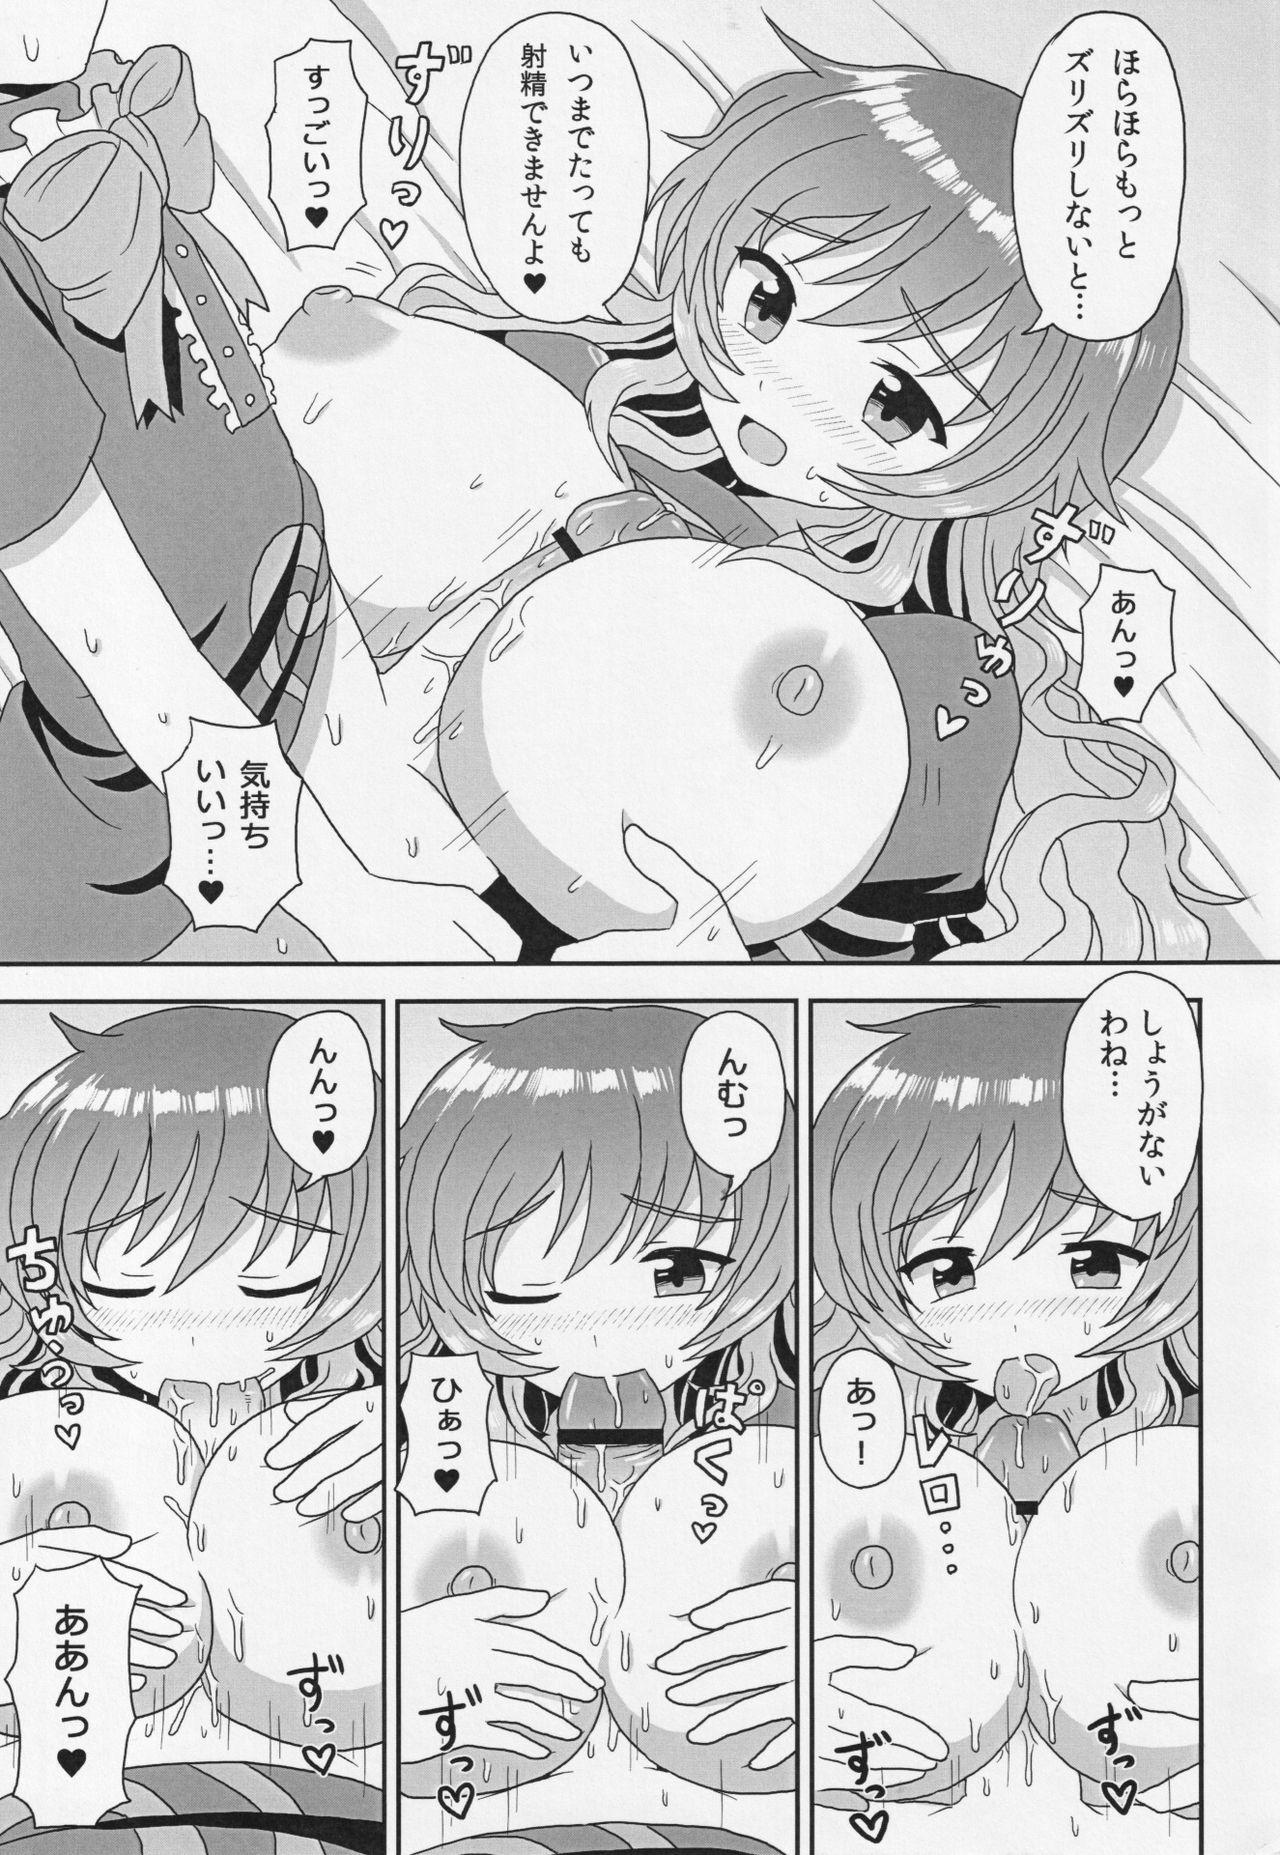 Perverted HH+ - Touhou project Couple Porn - Page 6